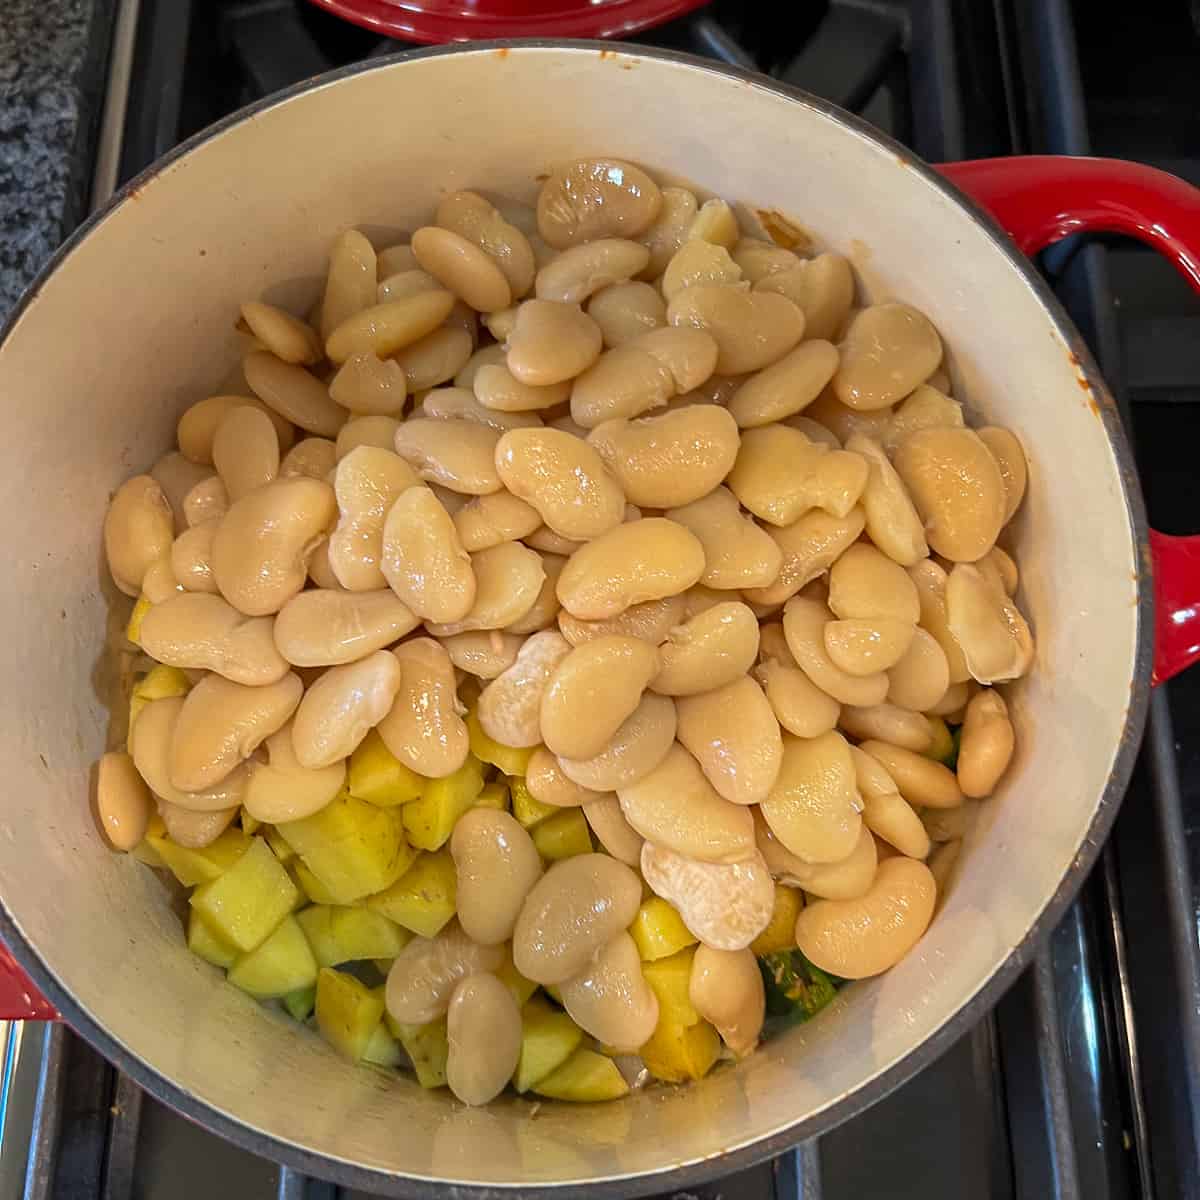 A pot with large lima beans and diced potatoes on top of other veggies.